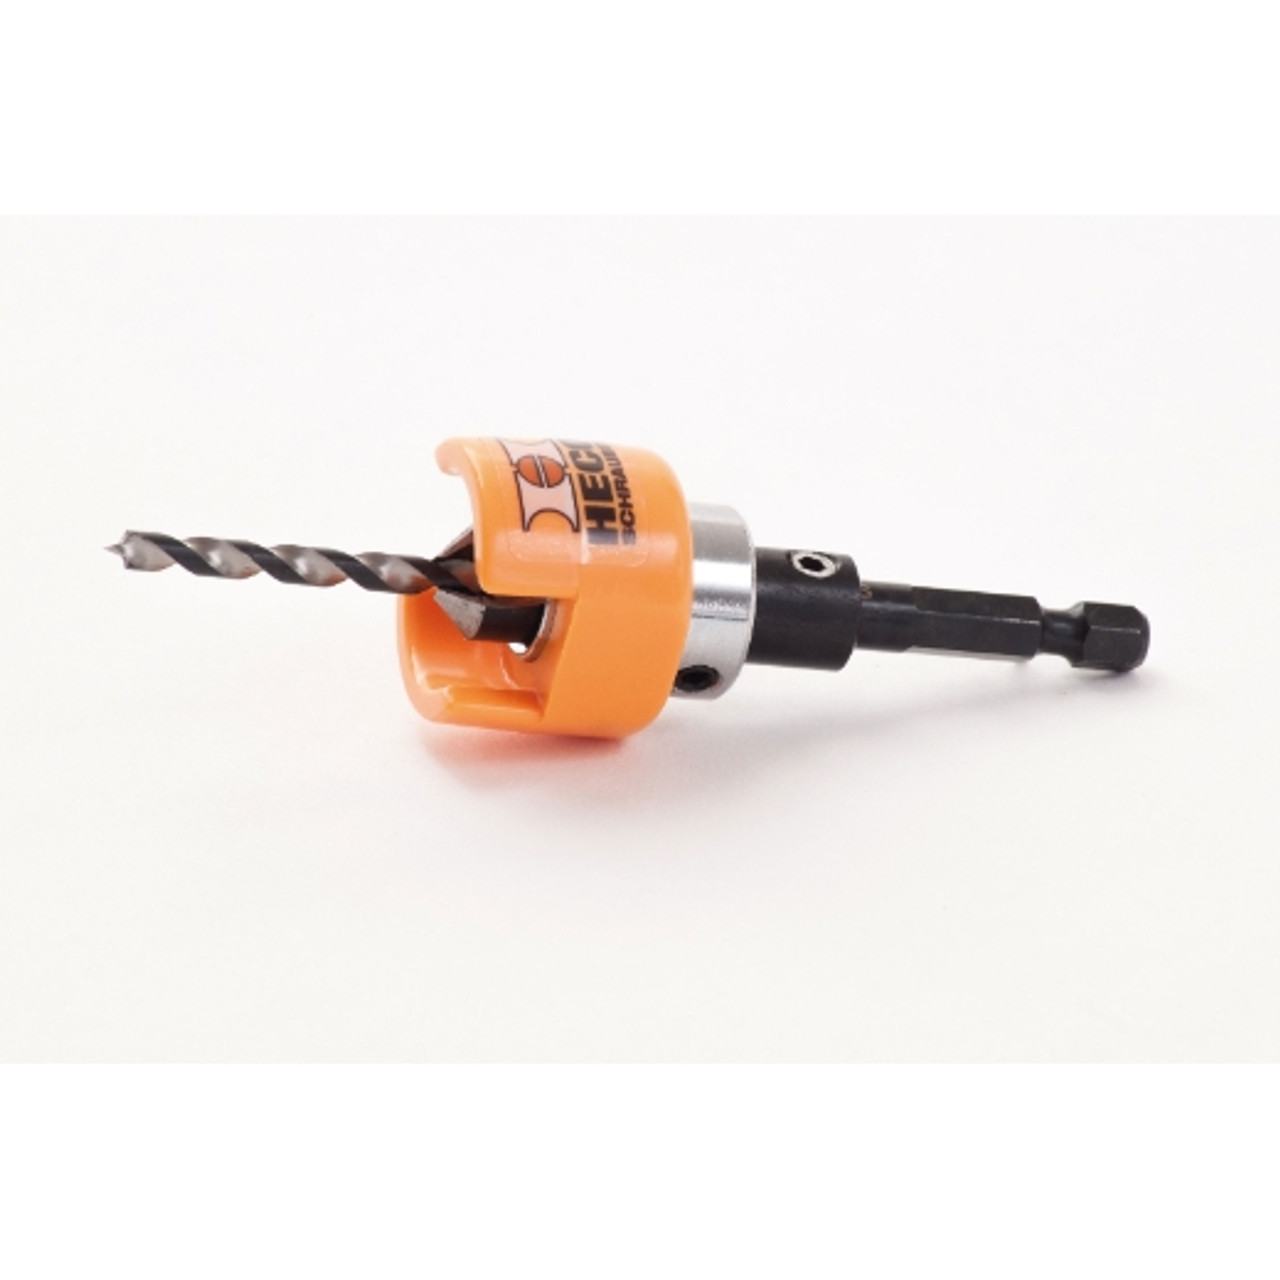 HECO Schrauben Countersink | Countersinking Tool with Depth Stop  with Decking Screws for Deck Building, Deck Builders in Melbourne, Sydney and Brisbane.